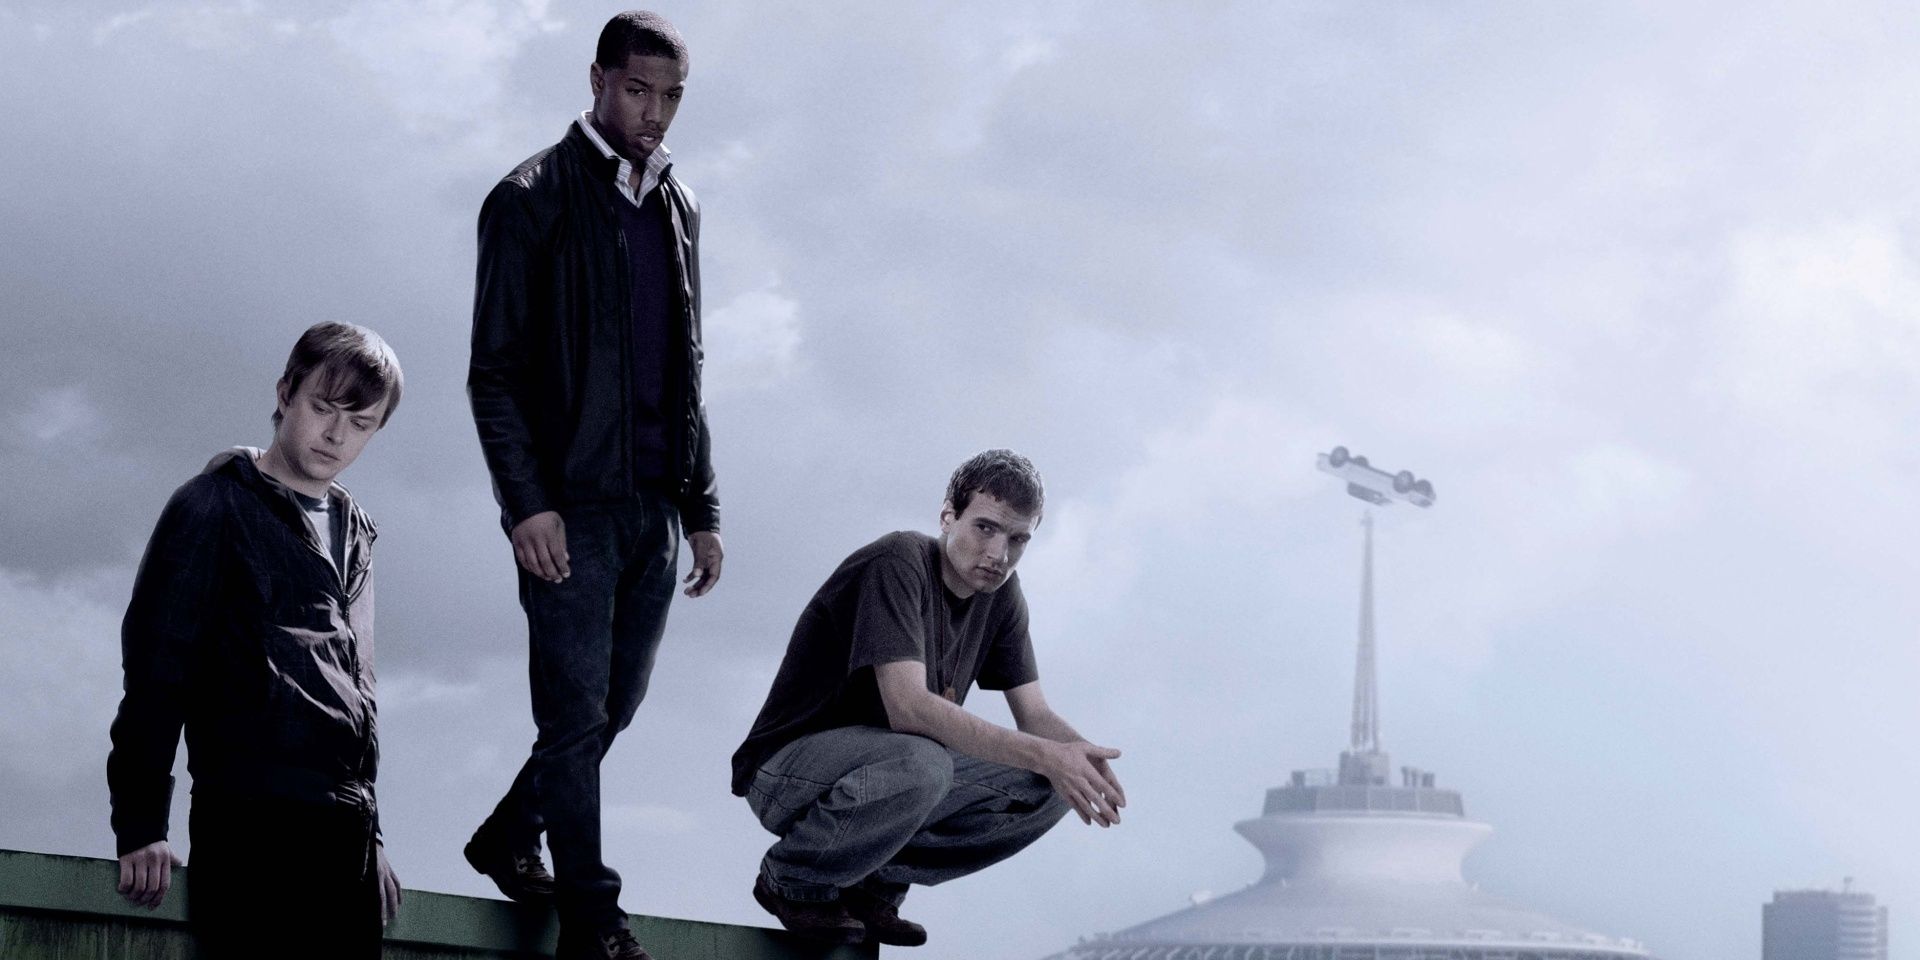 The three main characters from Chronicle standing in a foggy background